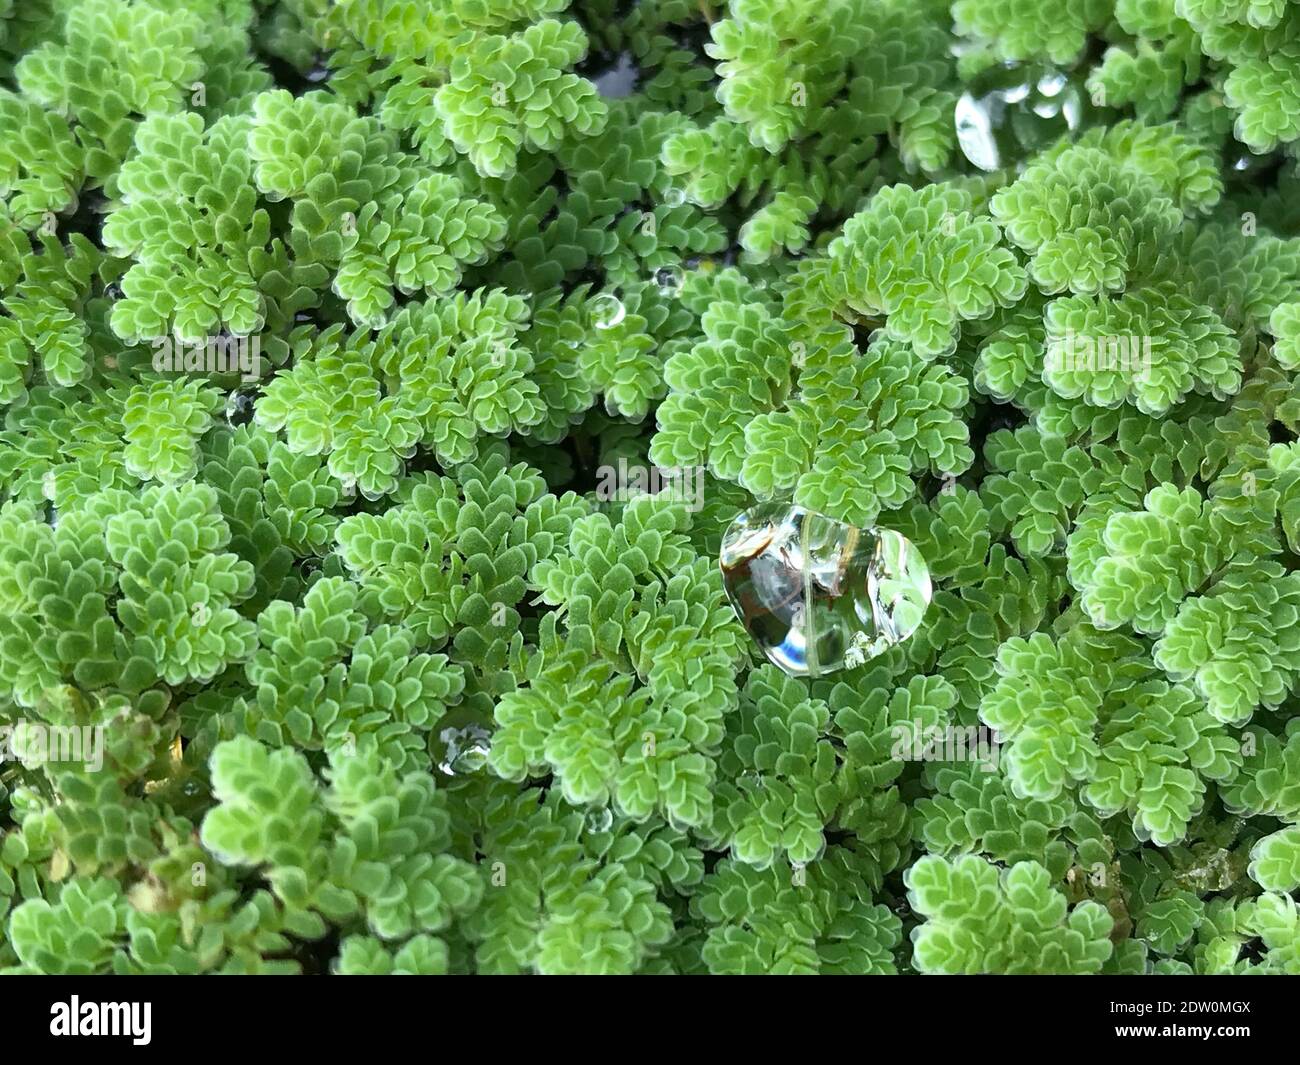 High Angle View Of Water Drop On Plants Stock Photo